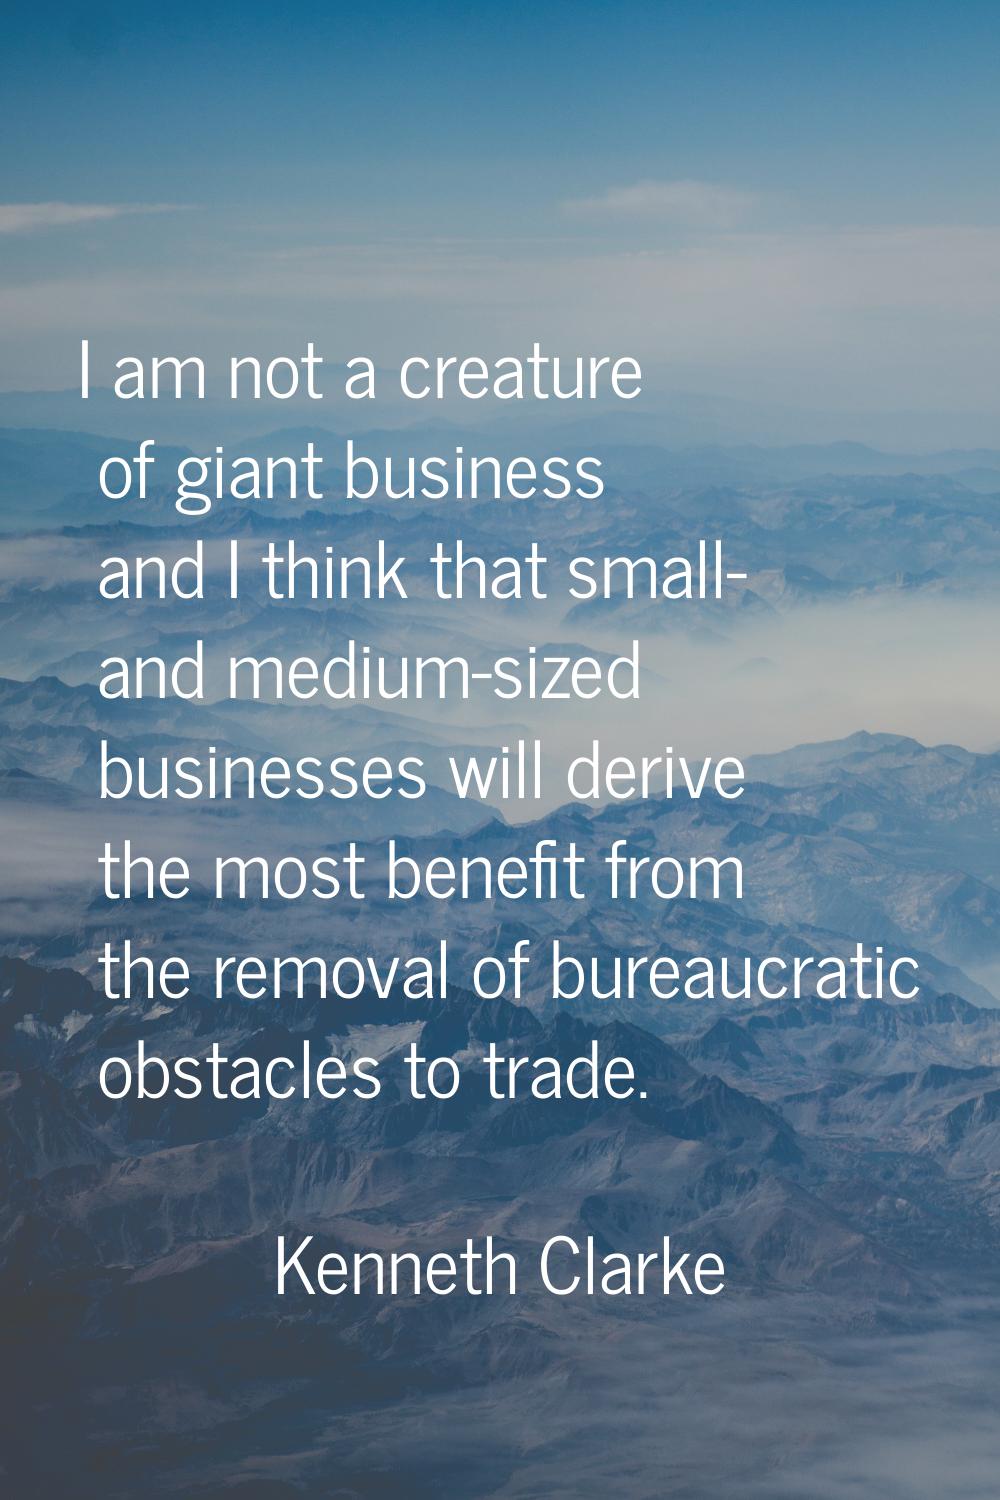 I am not a creature of giant business and I think that small- and medium-sized businesses will deri